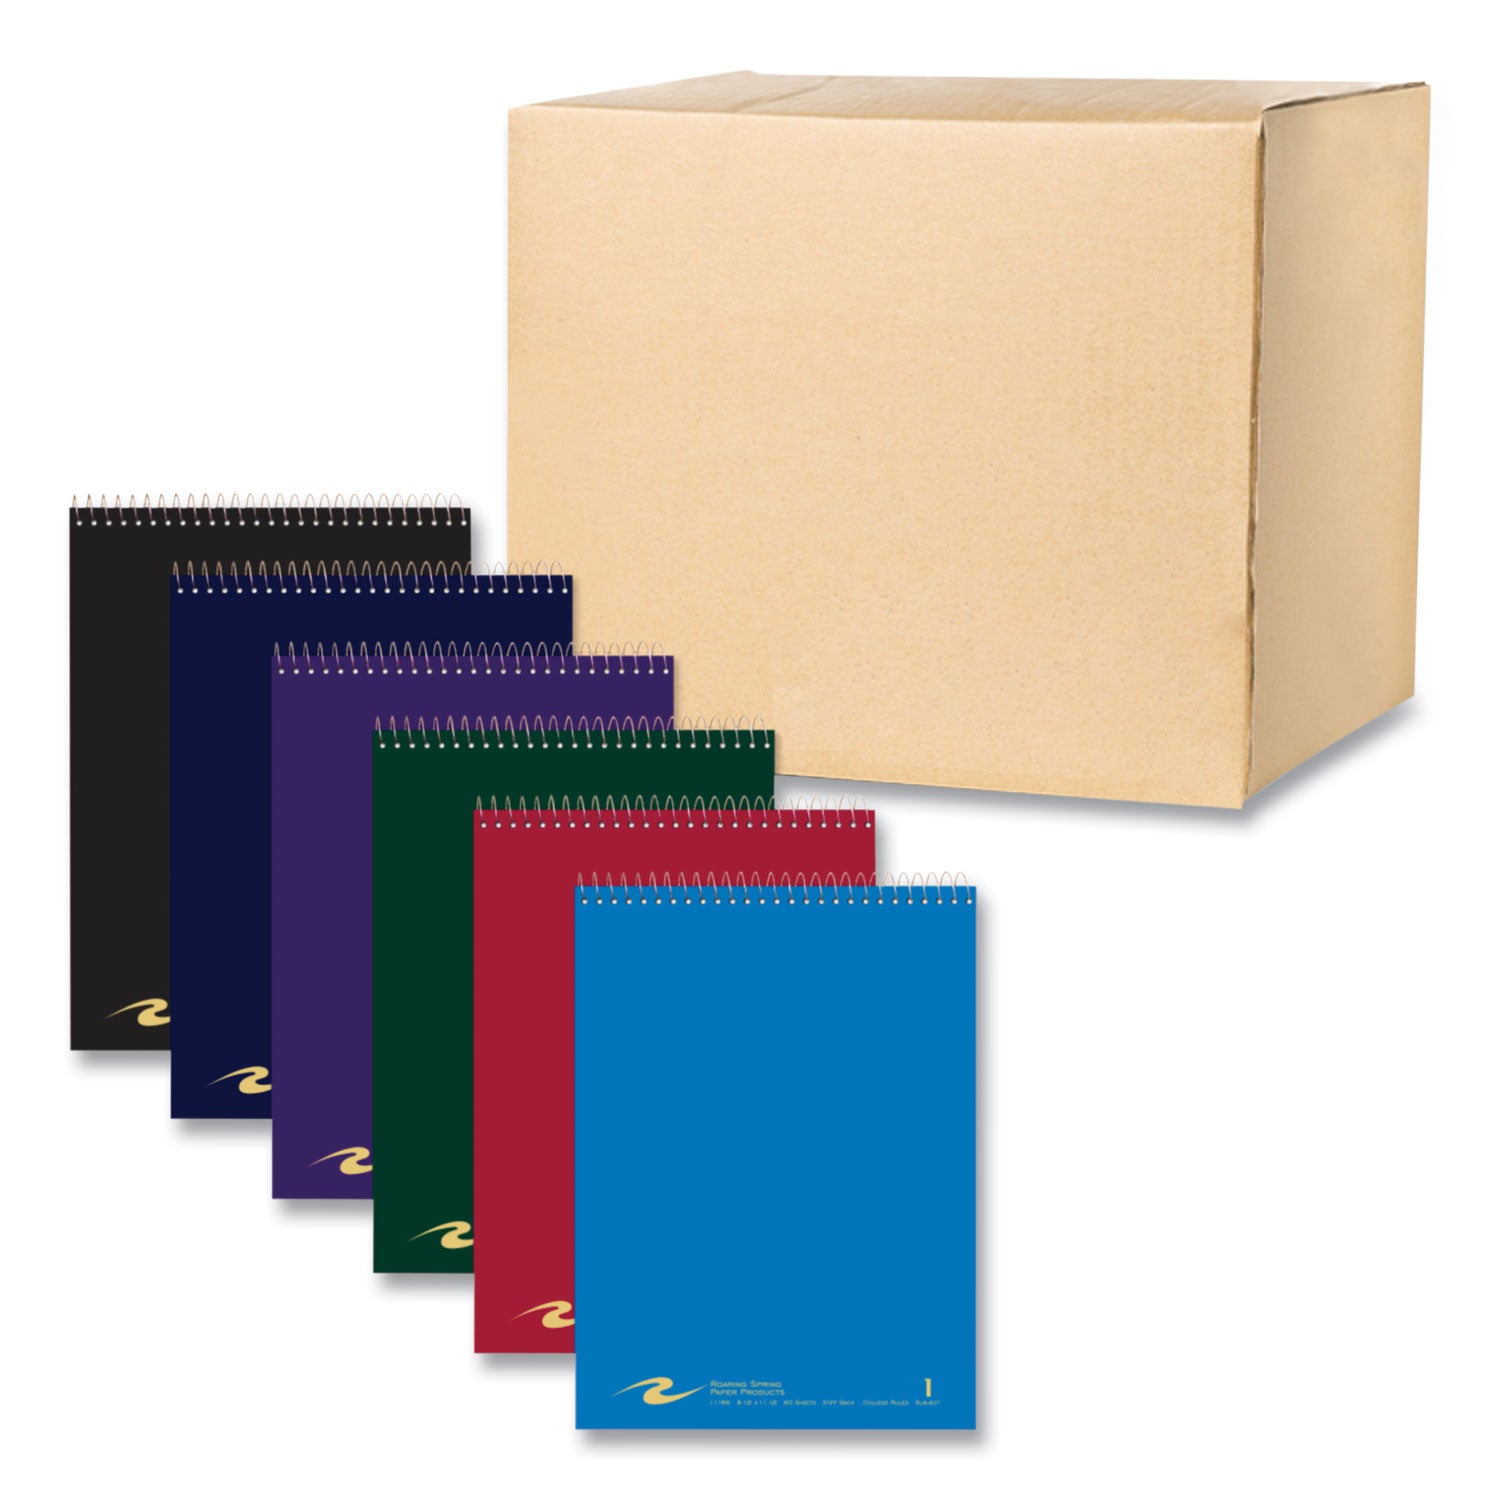 flipper-subject-wirebound-notebook-1-subject-asst-cover-colors-80-85-x-115-sheets-24-ct-ships-in-4-6-business-days_roa11186cs - 2